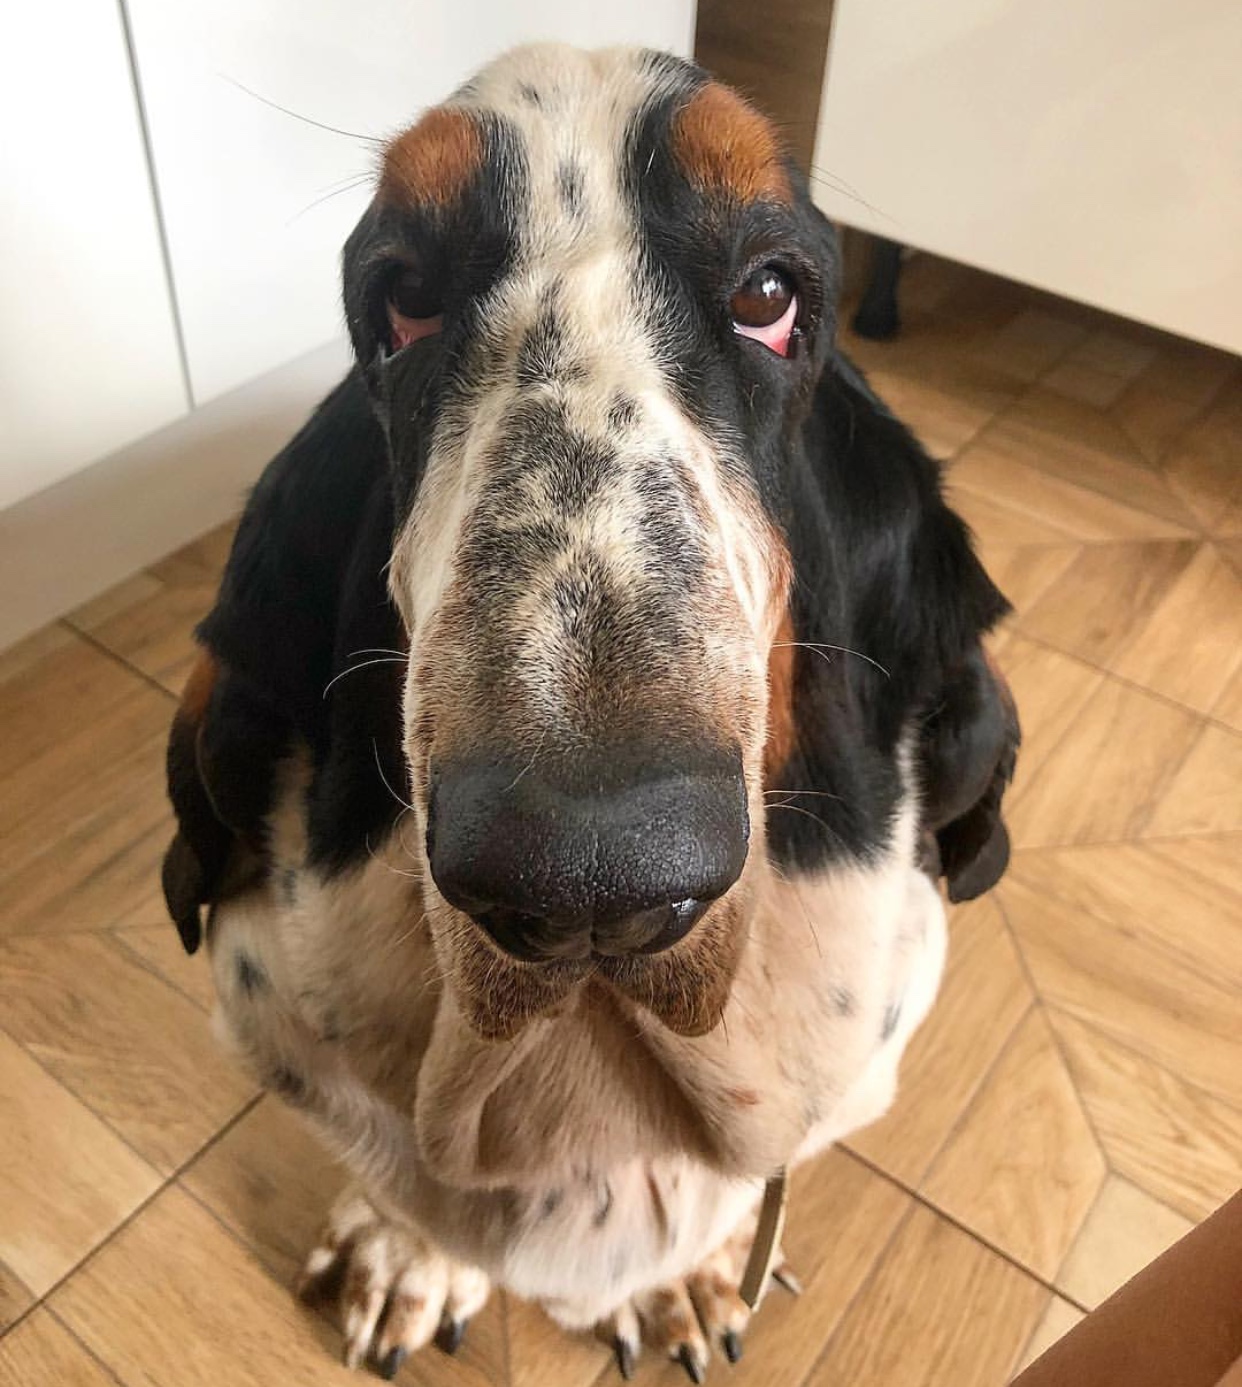 A Basset Hound sitting on the floor with its begging